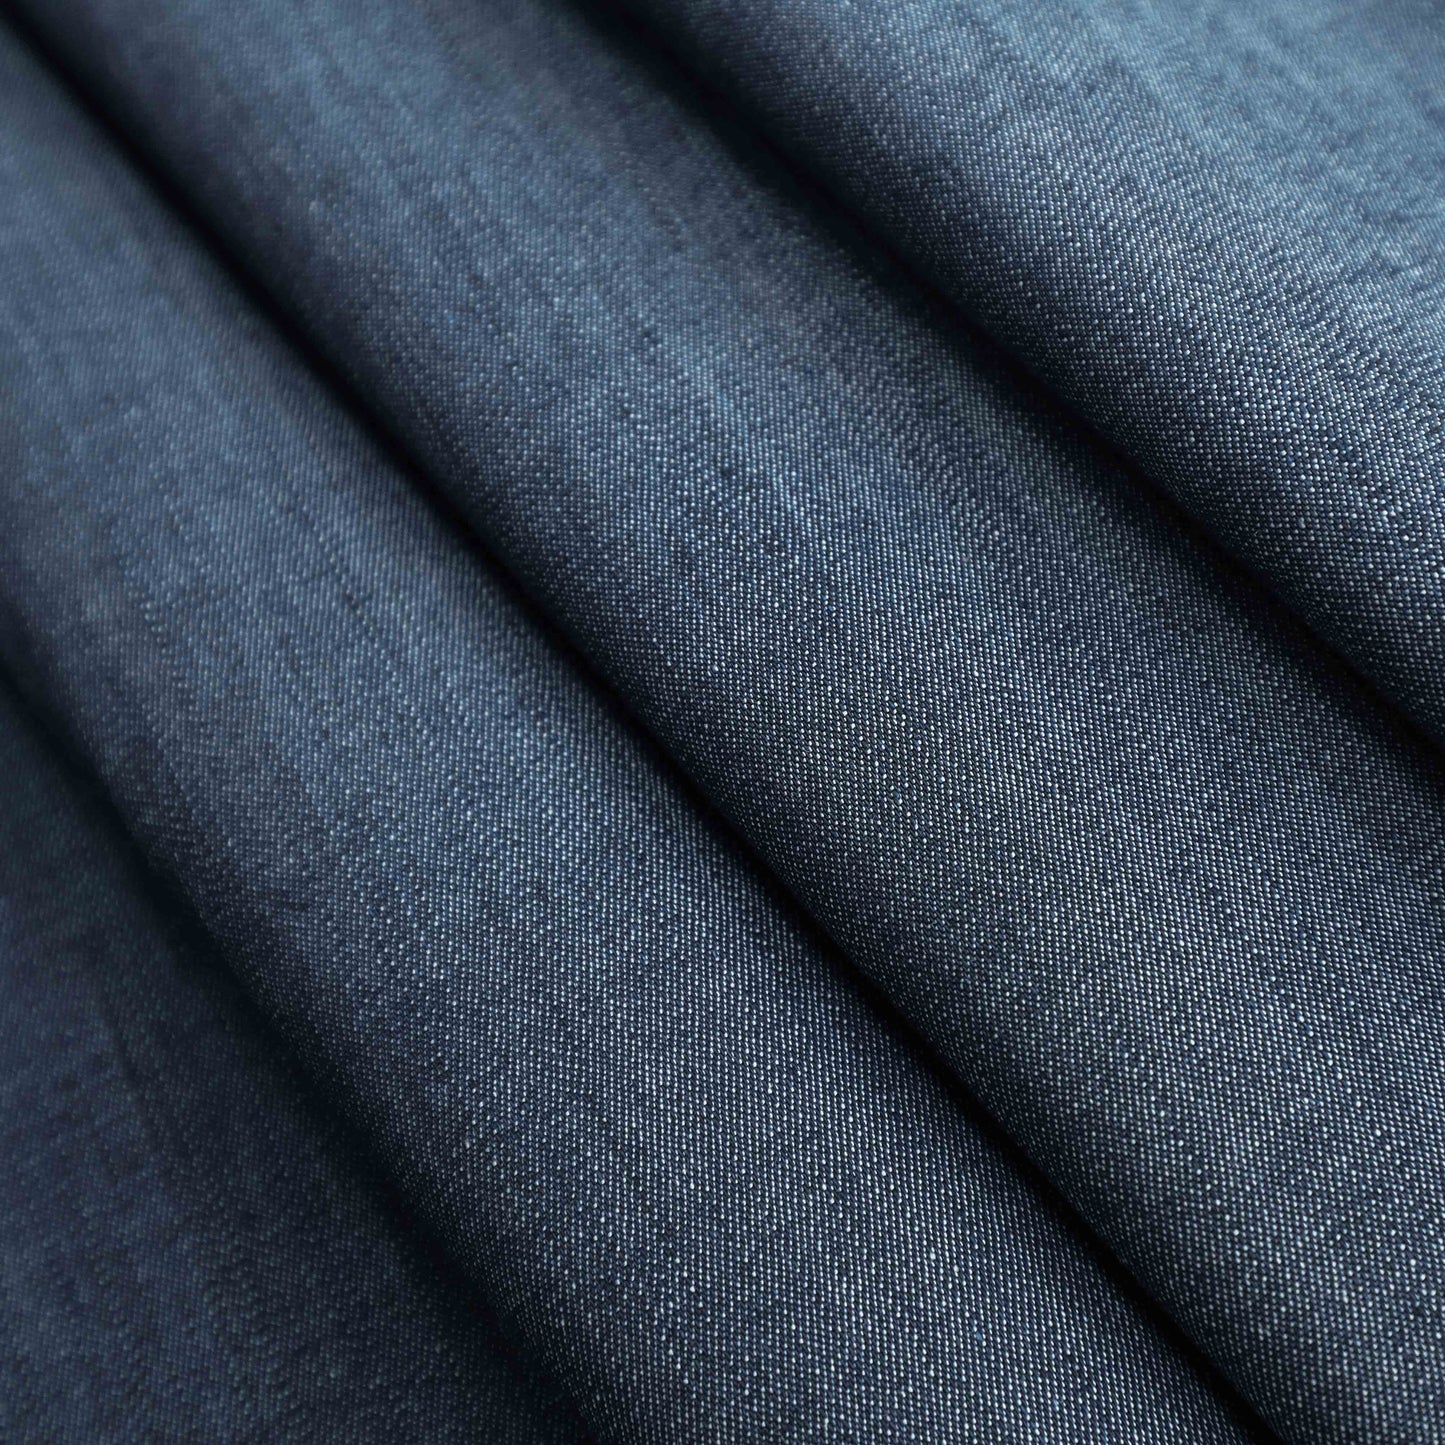 A mid-weight cotton stretch denim fabric. It does not snag or tear easily while still having a stretch to it.